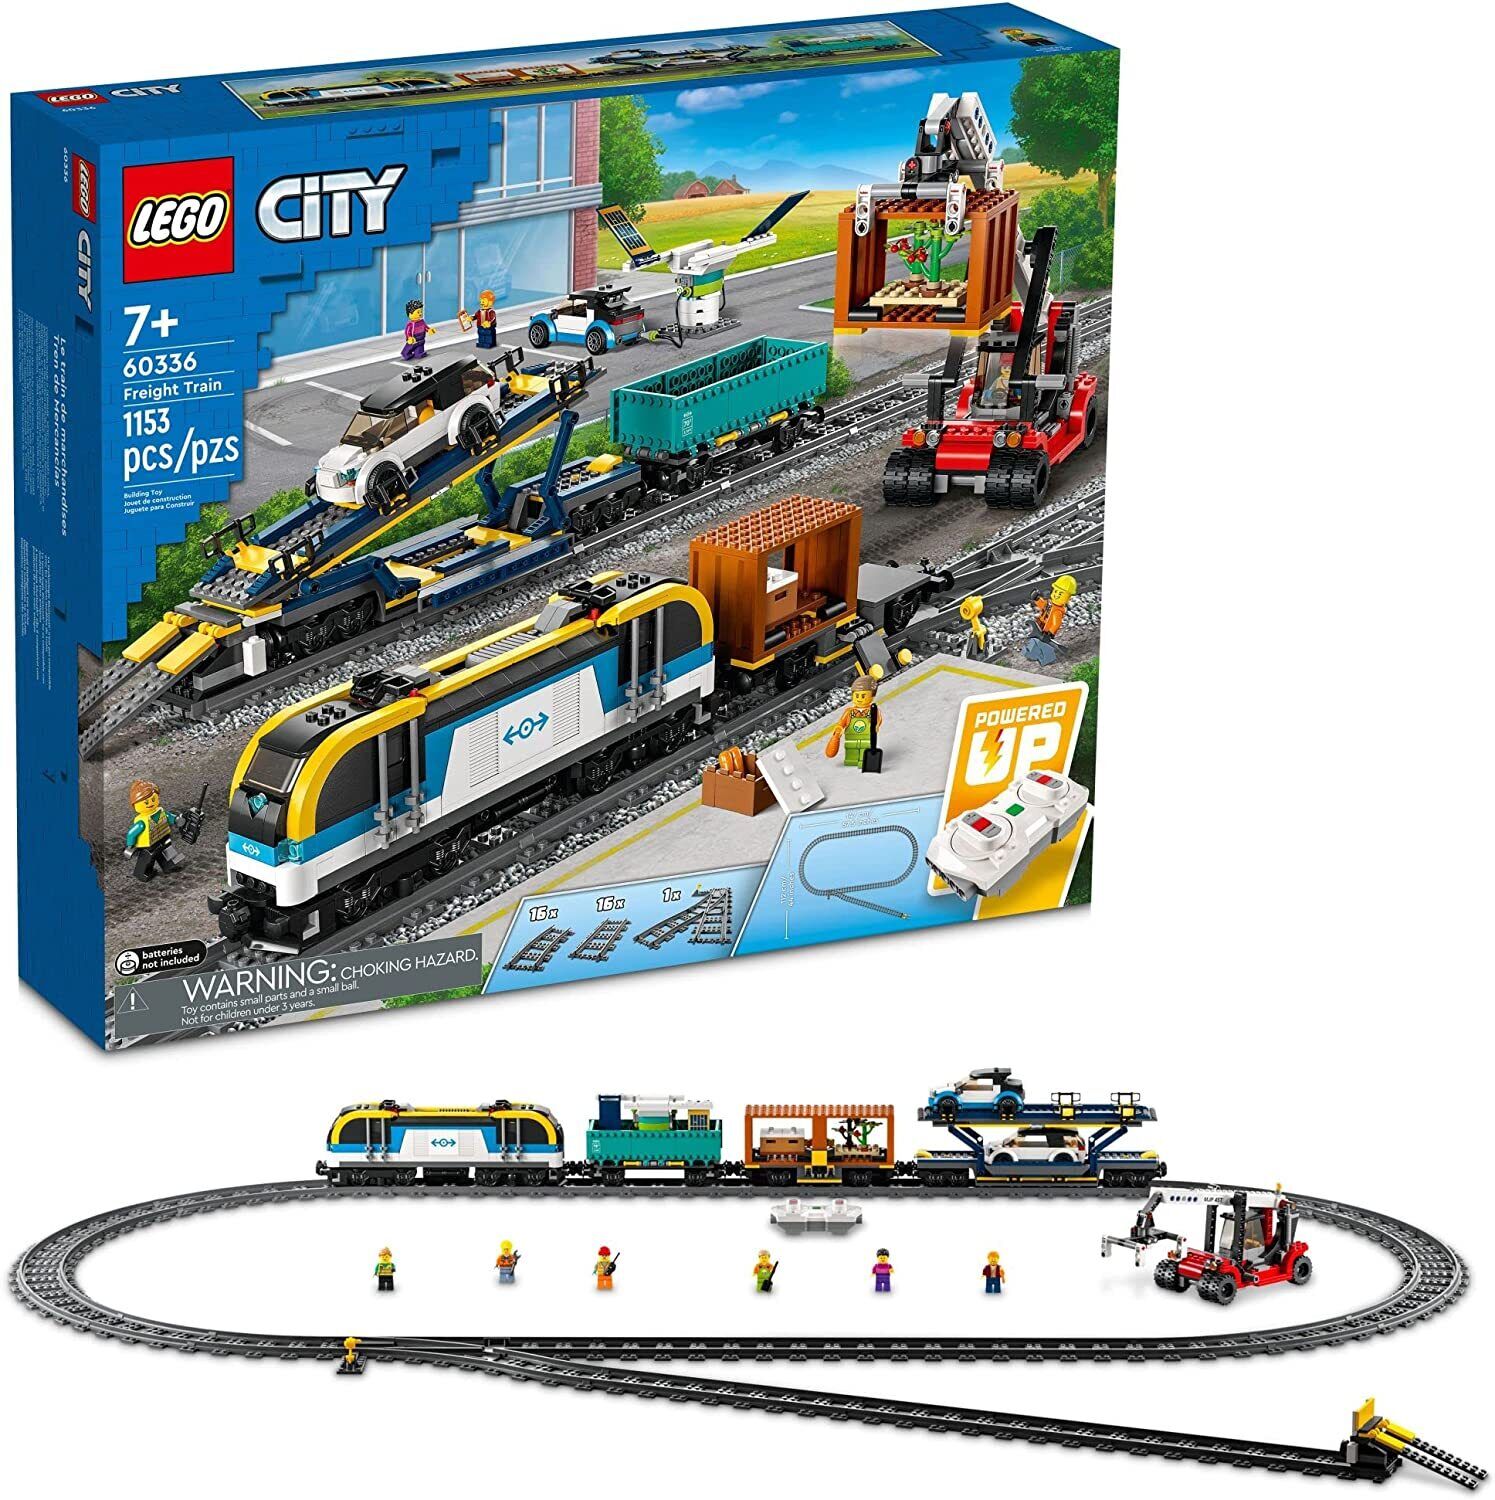 LEGO City Freight Train 60336 Building Toy Set with Powered Up Technology for Bo